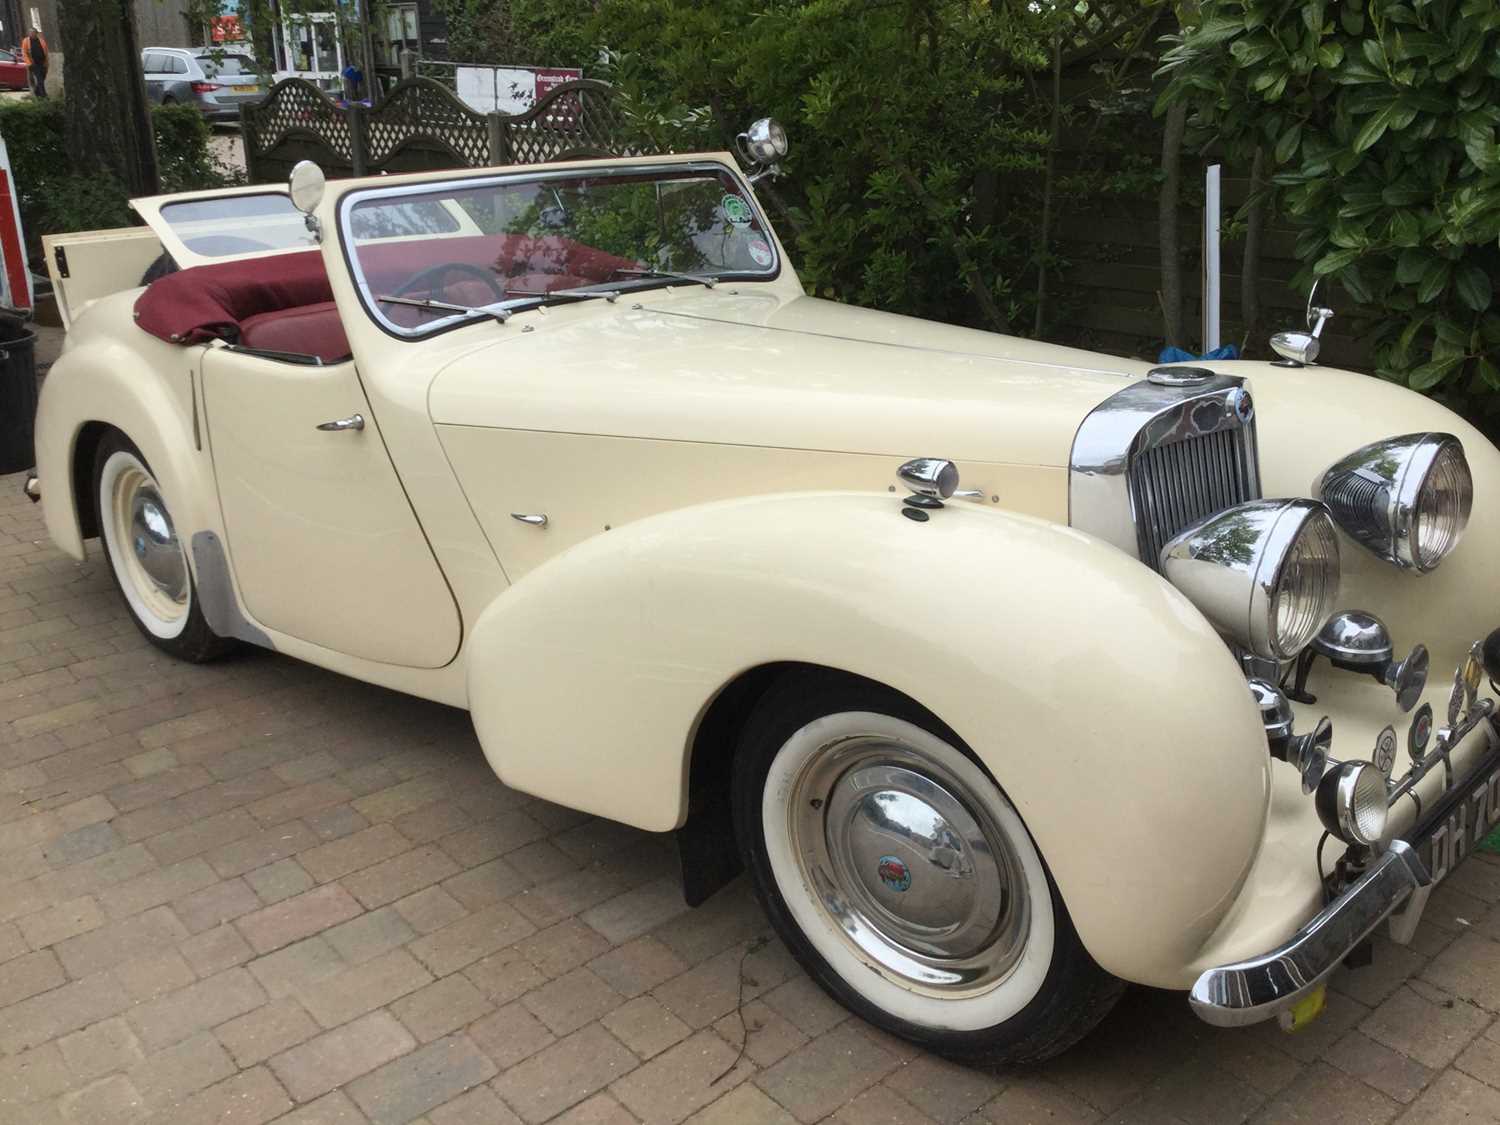 Lot 1 - 1948 Triumph 1800 Roadster (18TR), 1776cc straight four engine, 4 speed manual, Reg. No. LDH 700, finished in cream with red leather interior